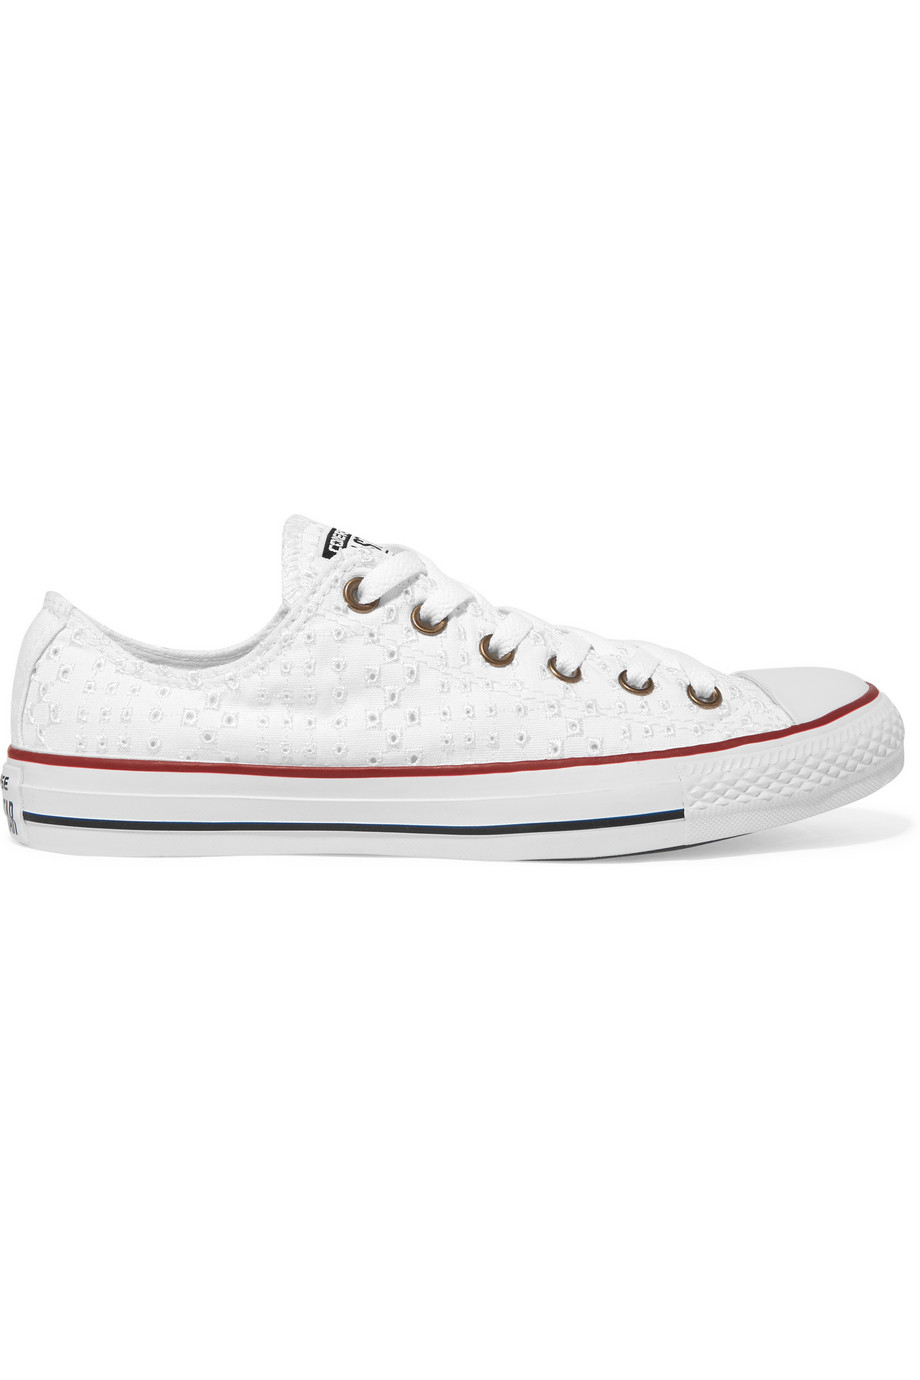 Converse Blanche Broderie Anglaise Flash Sales, 56% OFF | www.baton-rouge.es